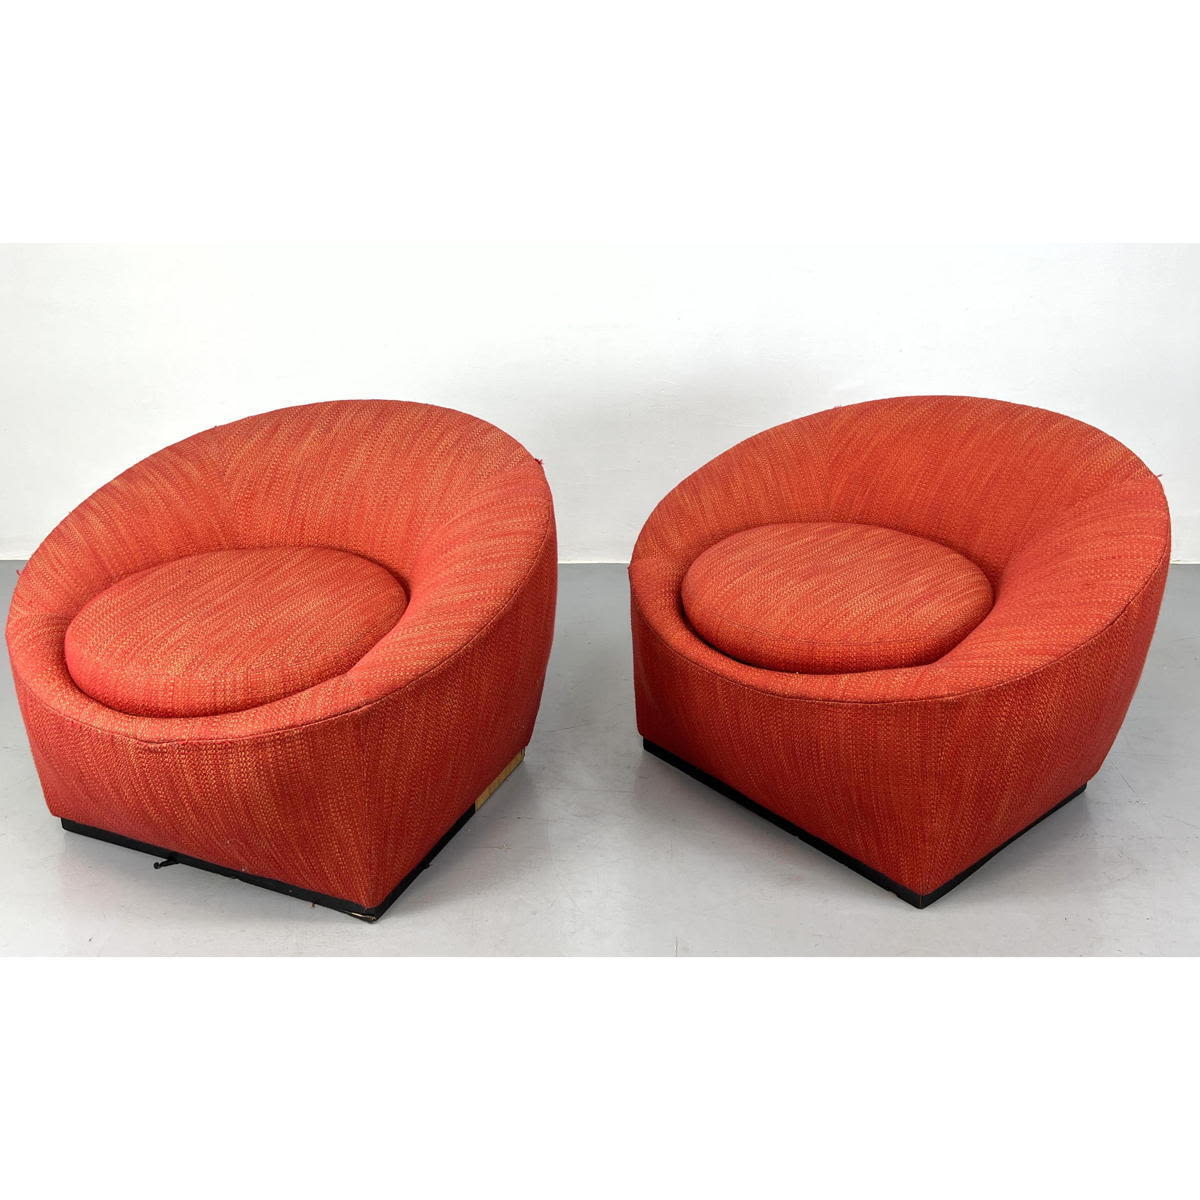 Pair Large Upholstered Lounge Chairs  2b84af